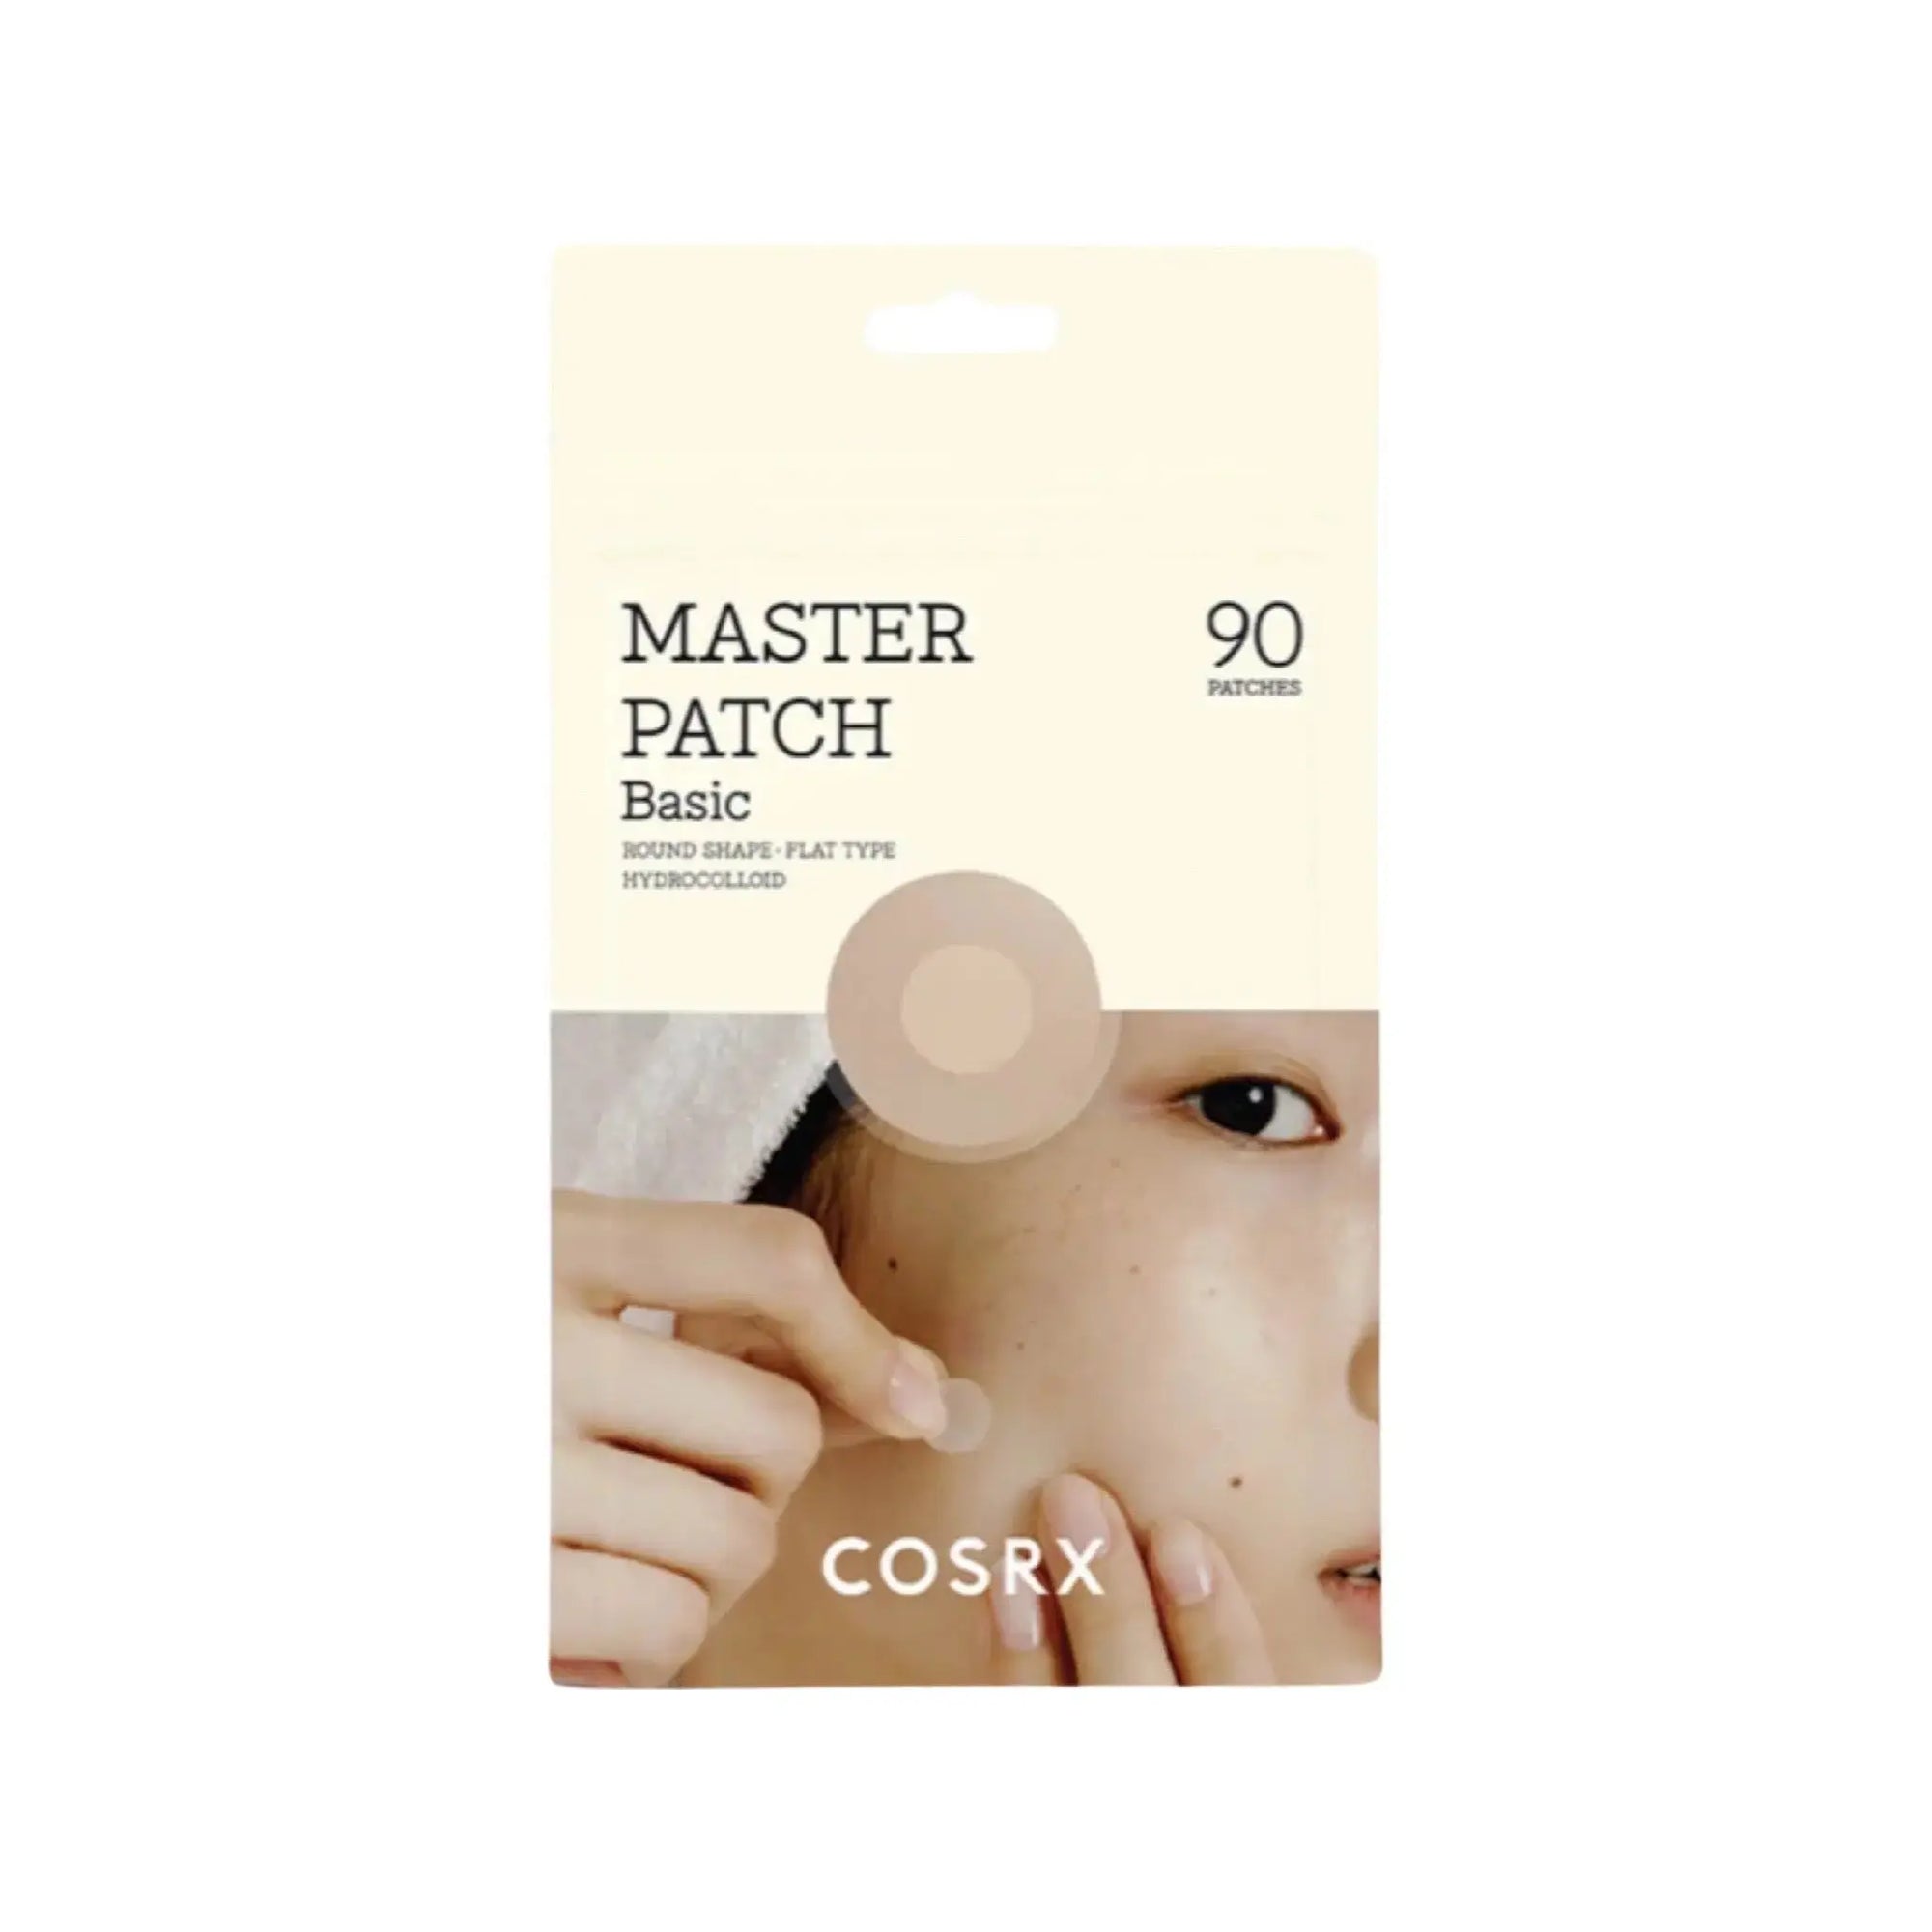 COSRX - Master Patch Basic (90 patches) (Exp. 2024-12-01) - WanderShop